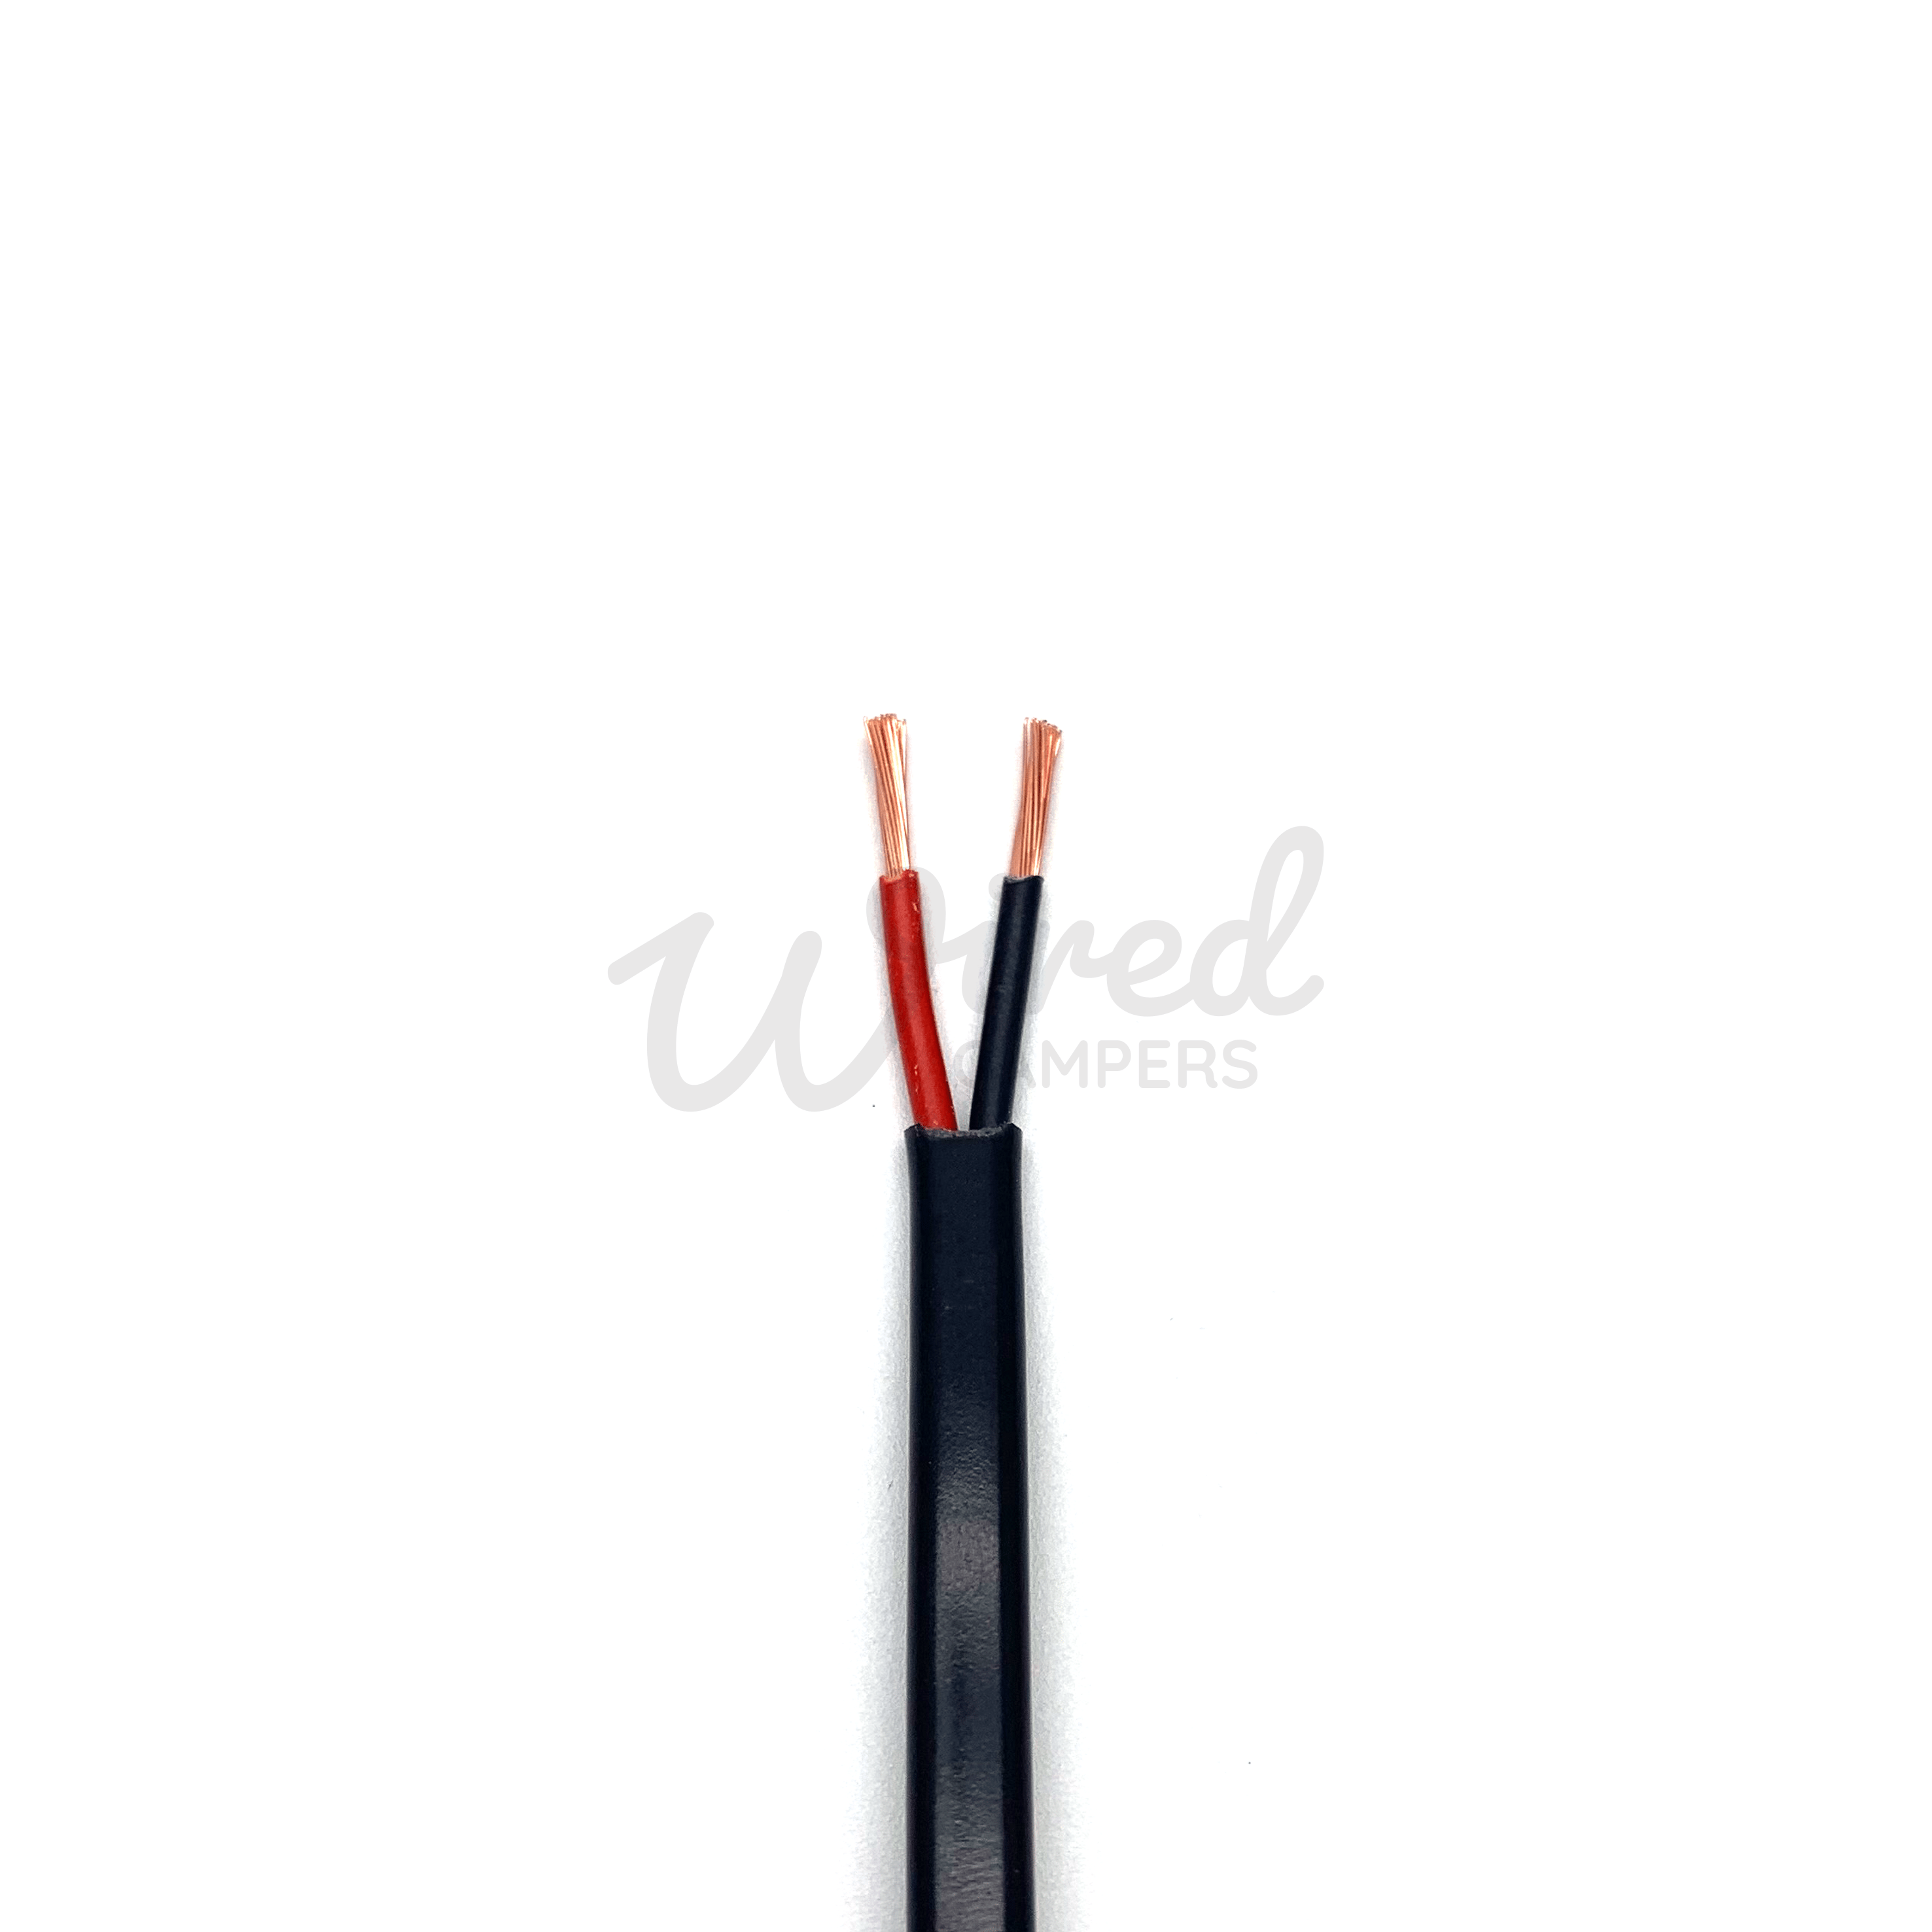 Wired Campers Limited 10M - 2.0mm2 25A Thin Wall Twin Core Flat Automotive Camper Cable